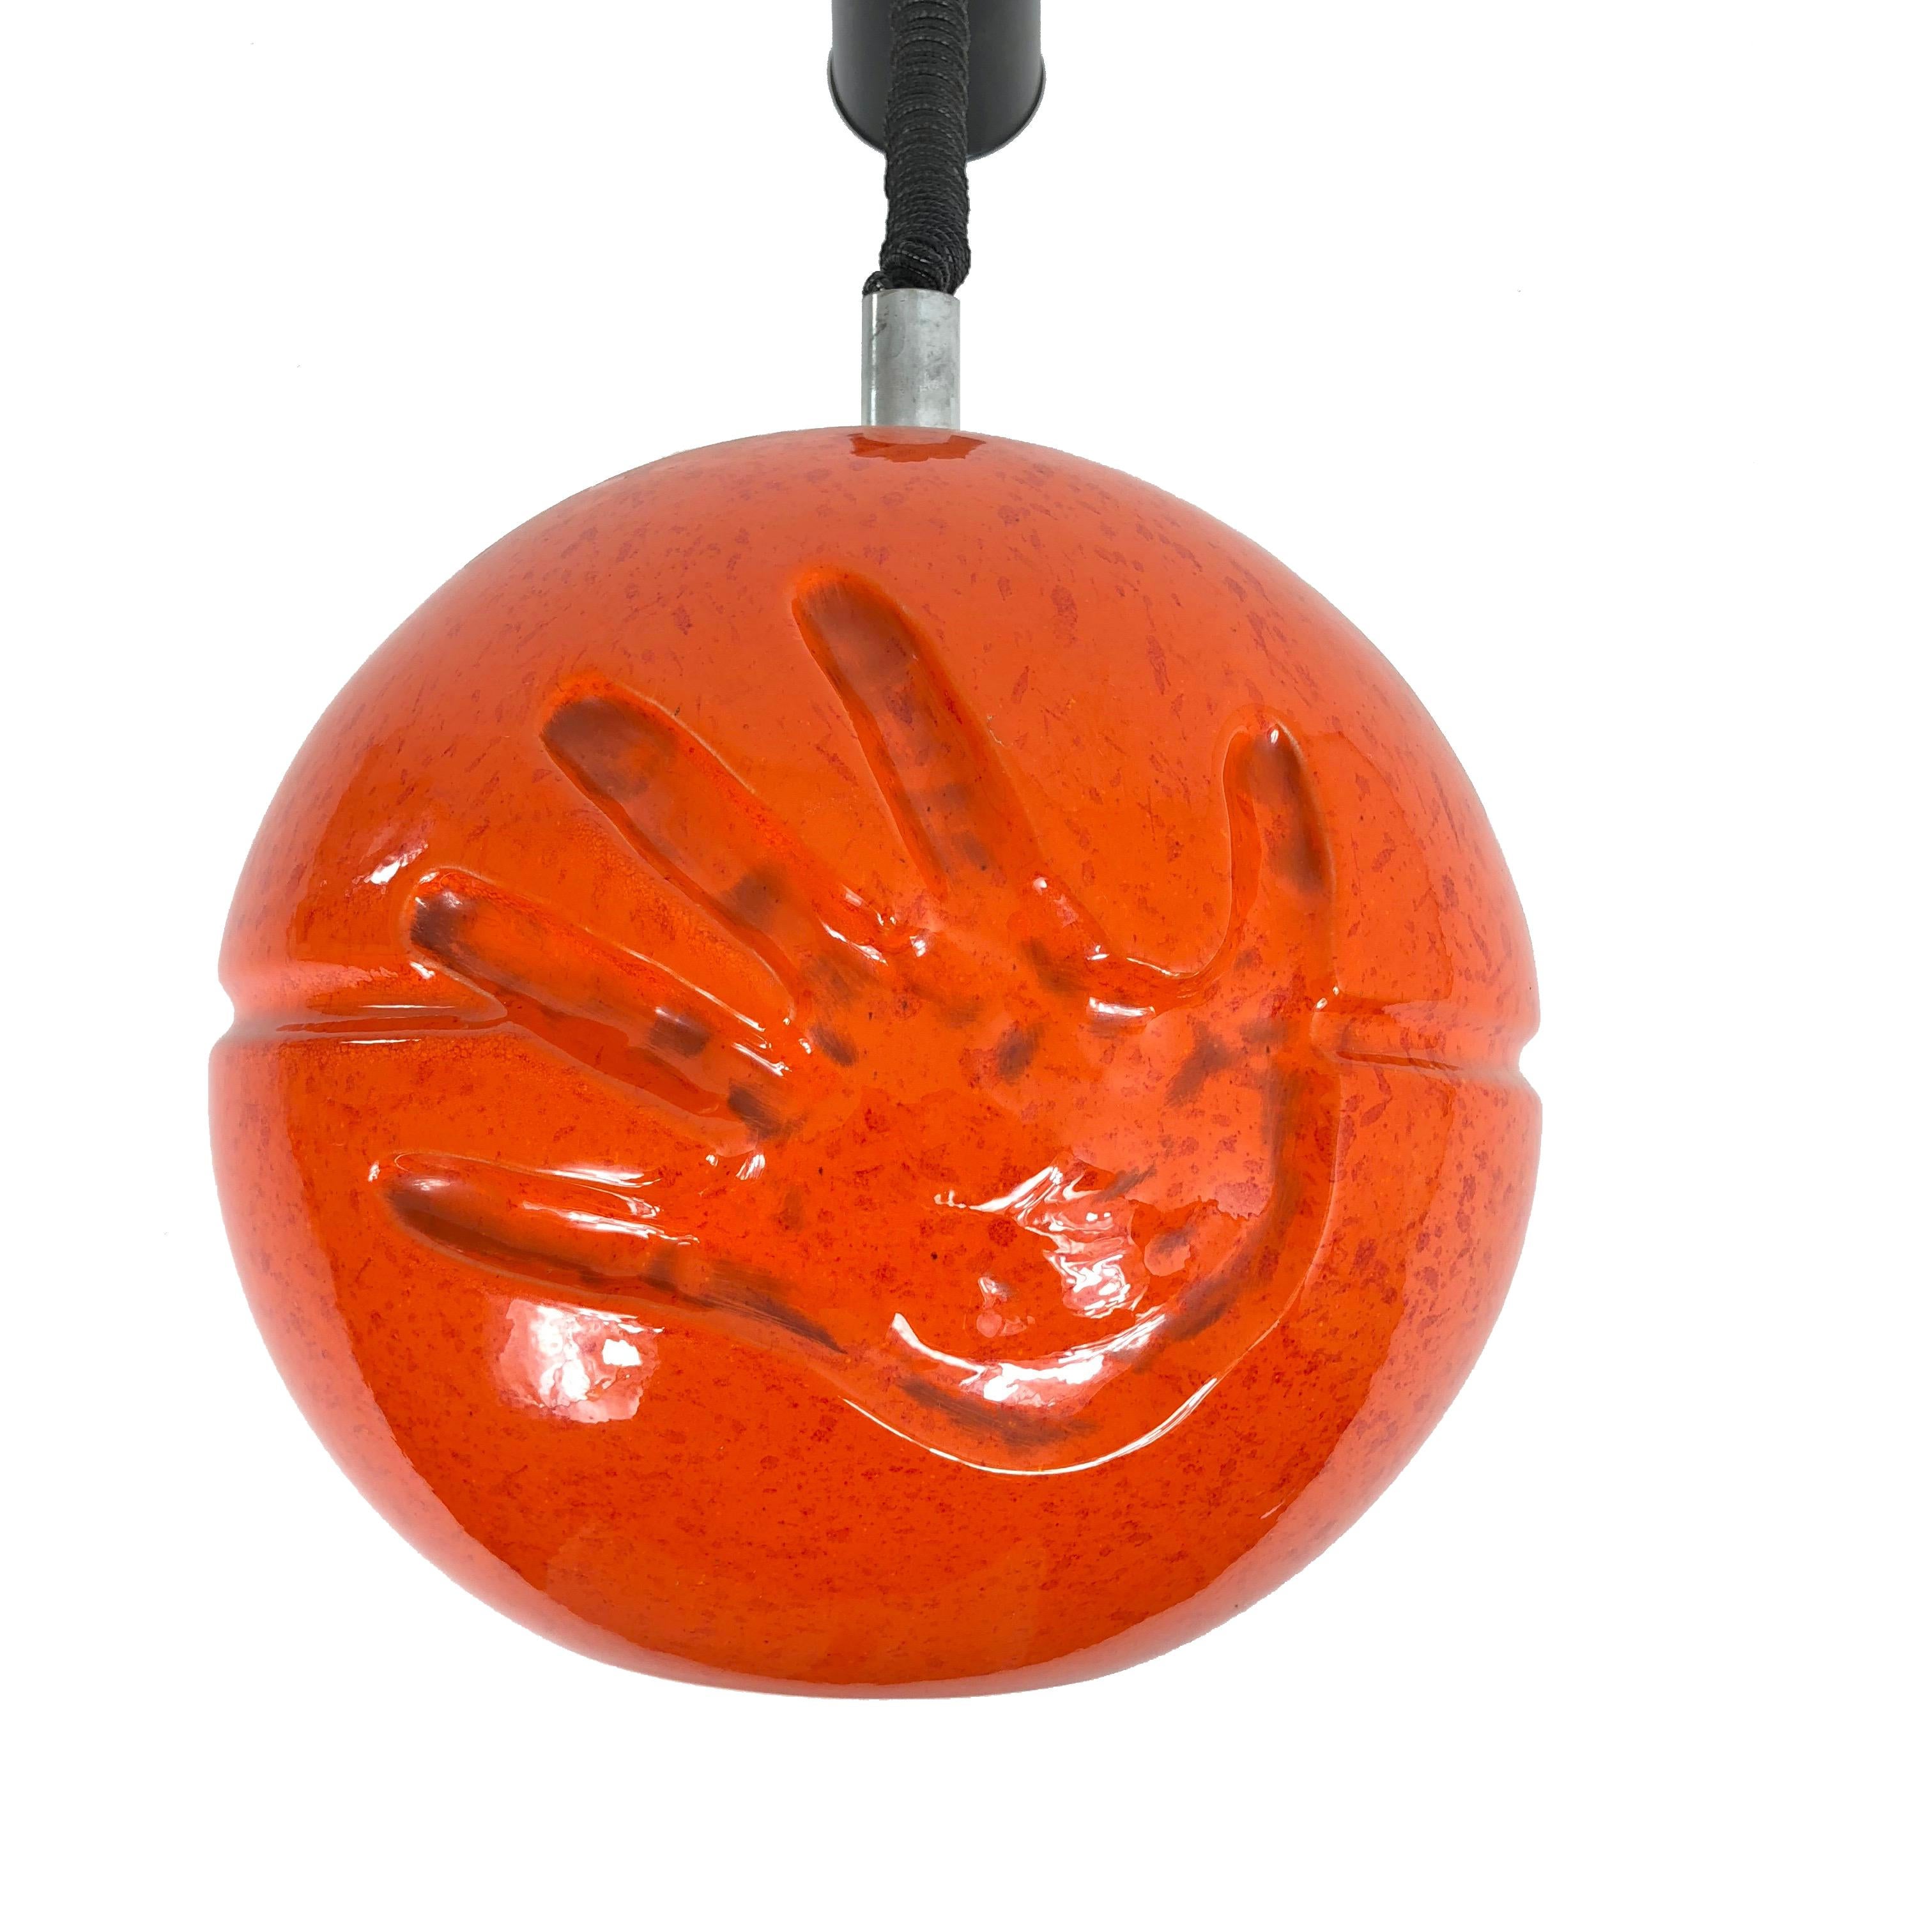 Rare spherical chandelier in lacquered orange ceramic attributed to Il Picchio. It has two imprinted hands on both sides. 
Perfect conditions.